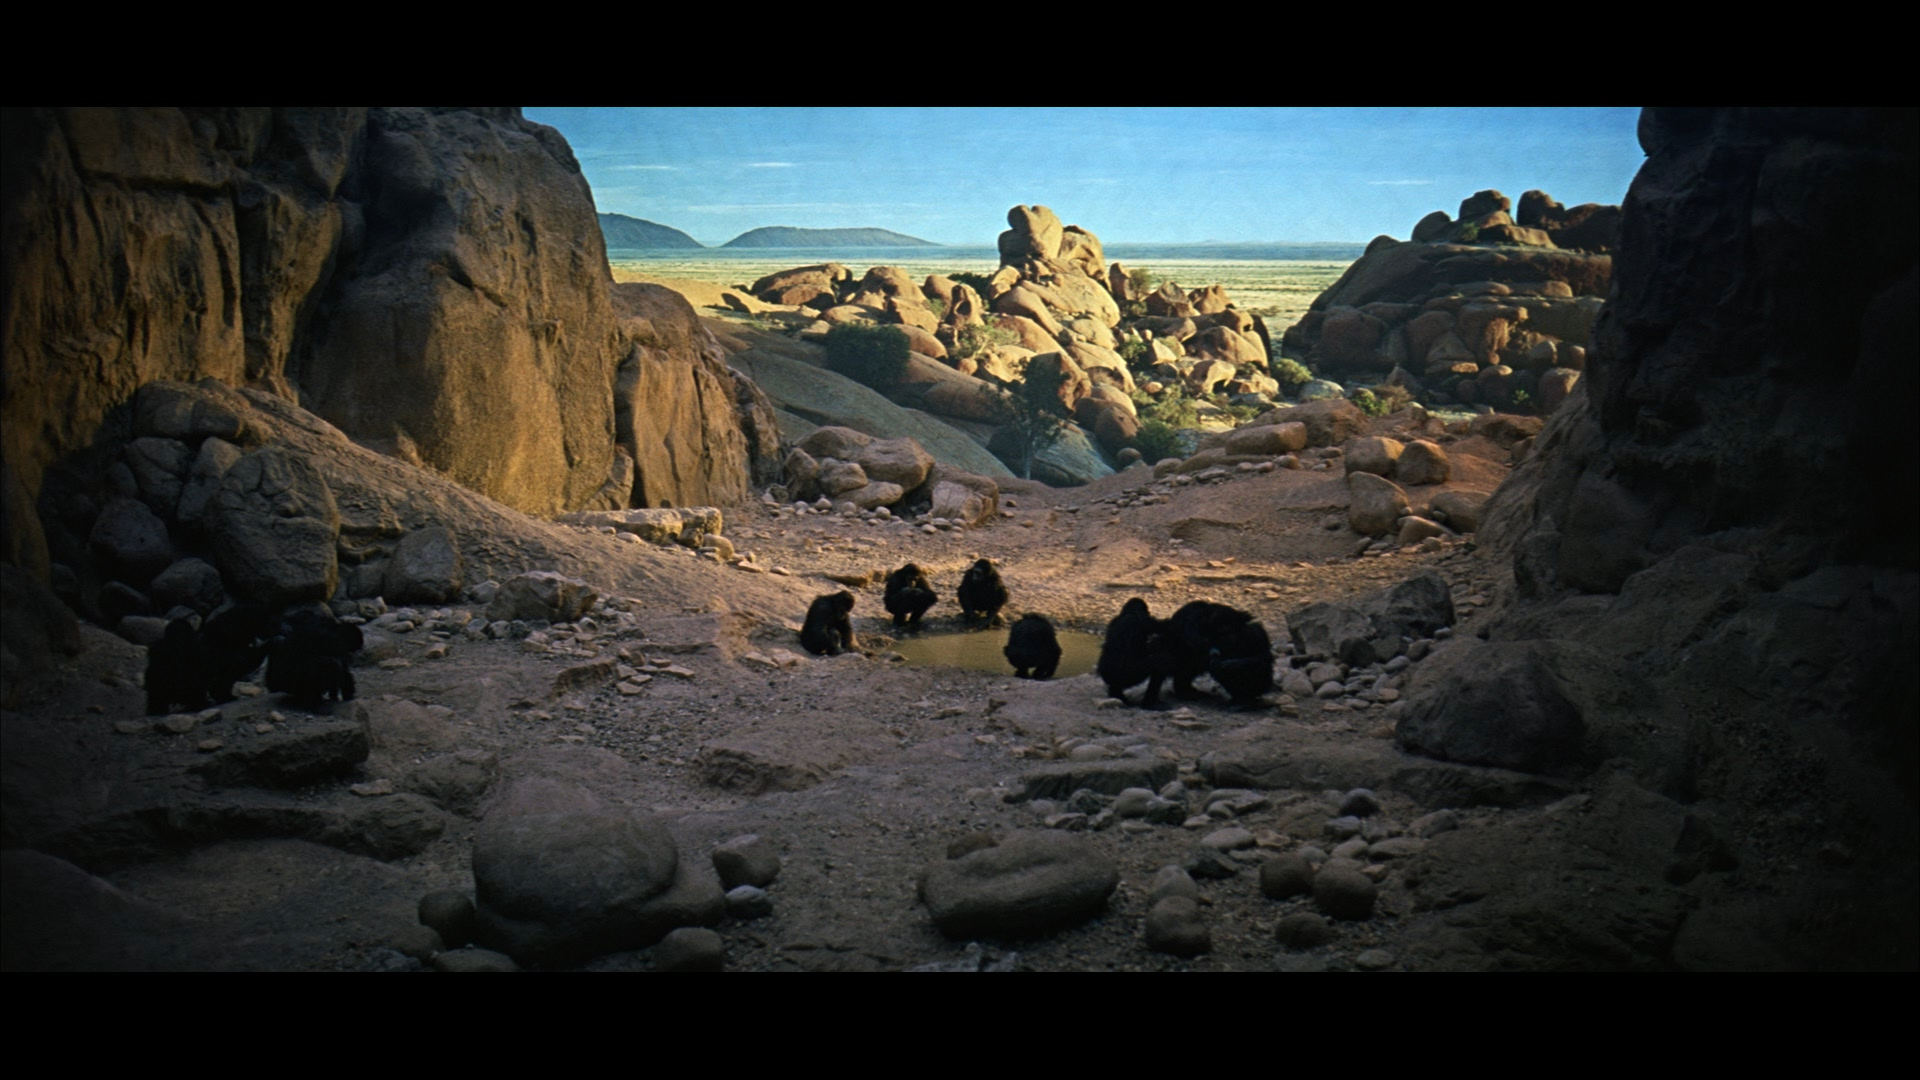 movies screenshots 2001 a space odyssey stanley kubrick #QWF-